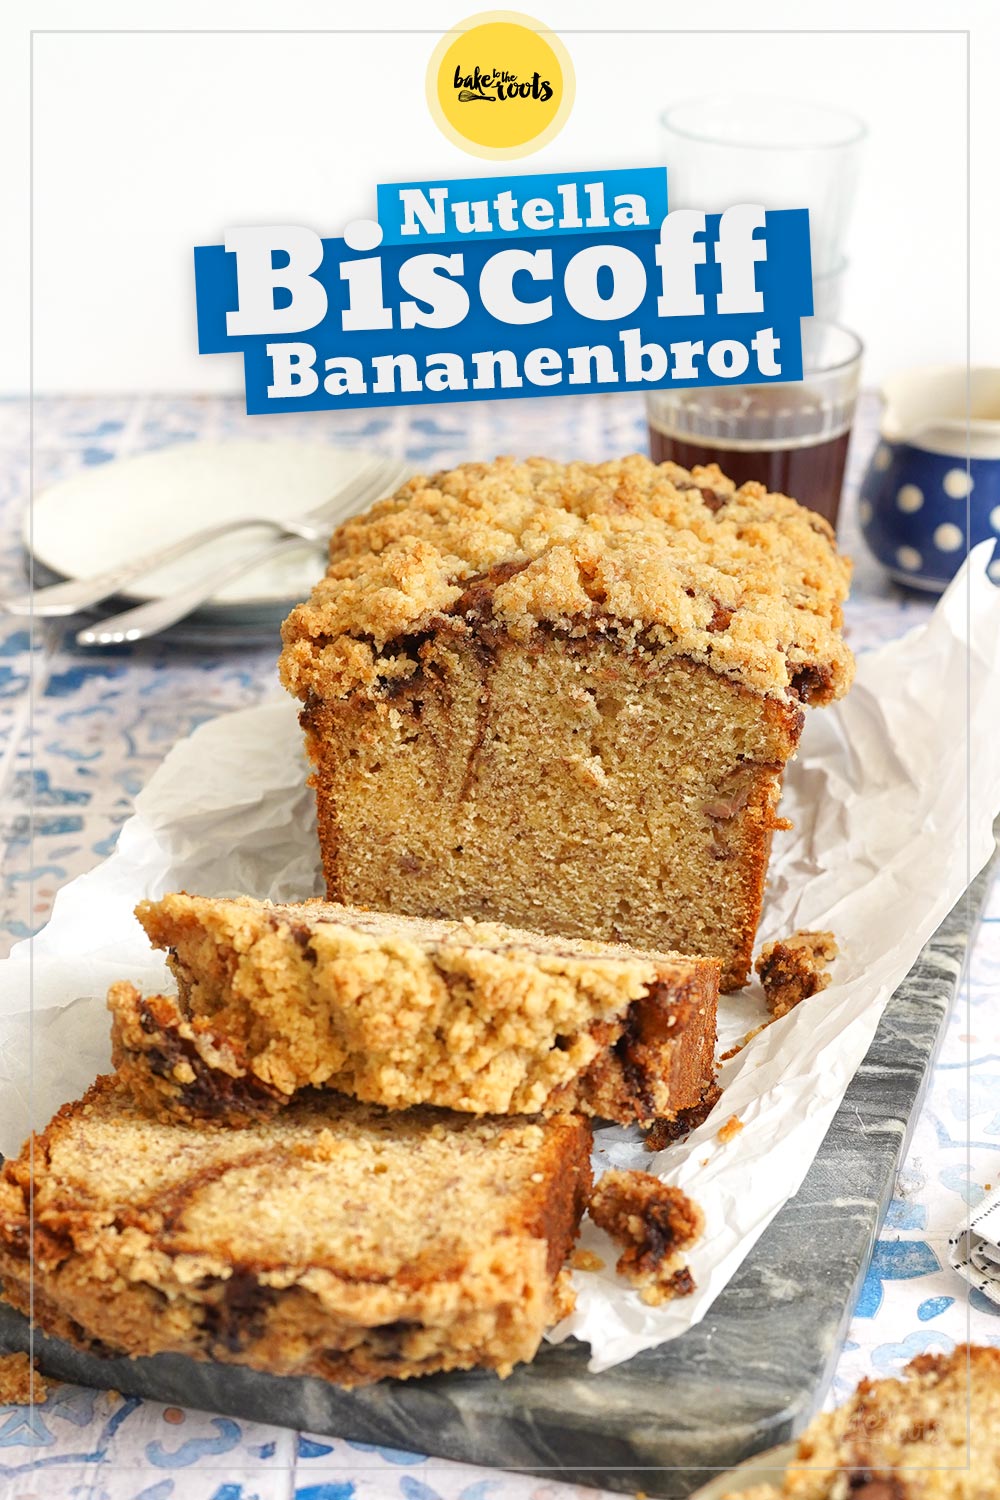 Nutella Biscoff Bananenbrot | Bake to the roots